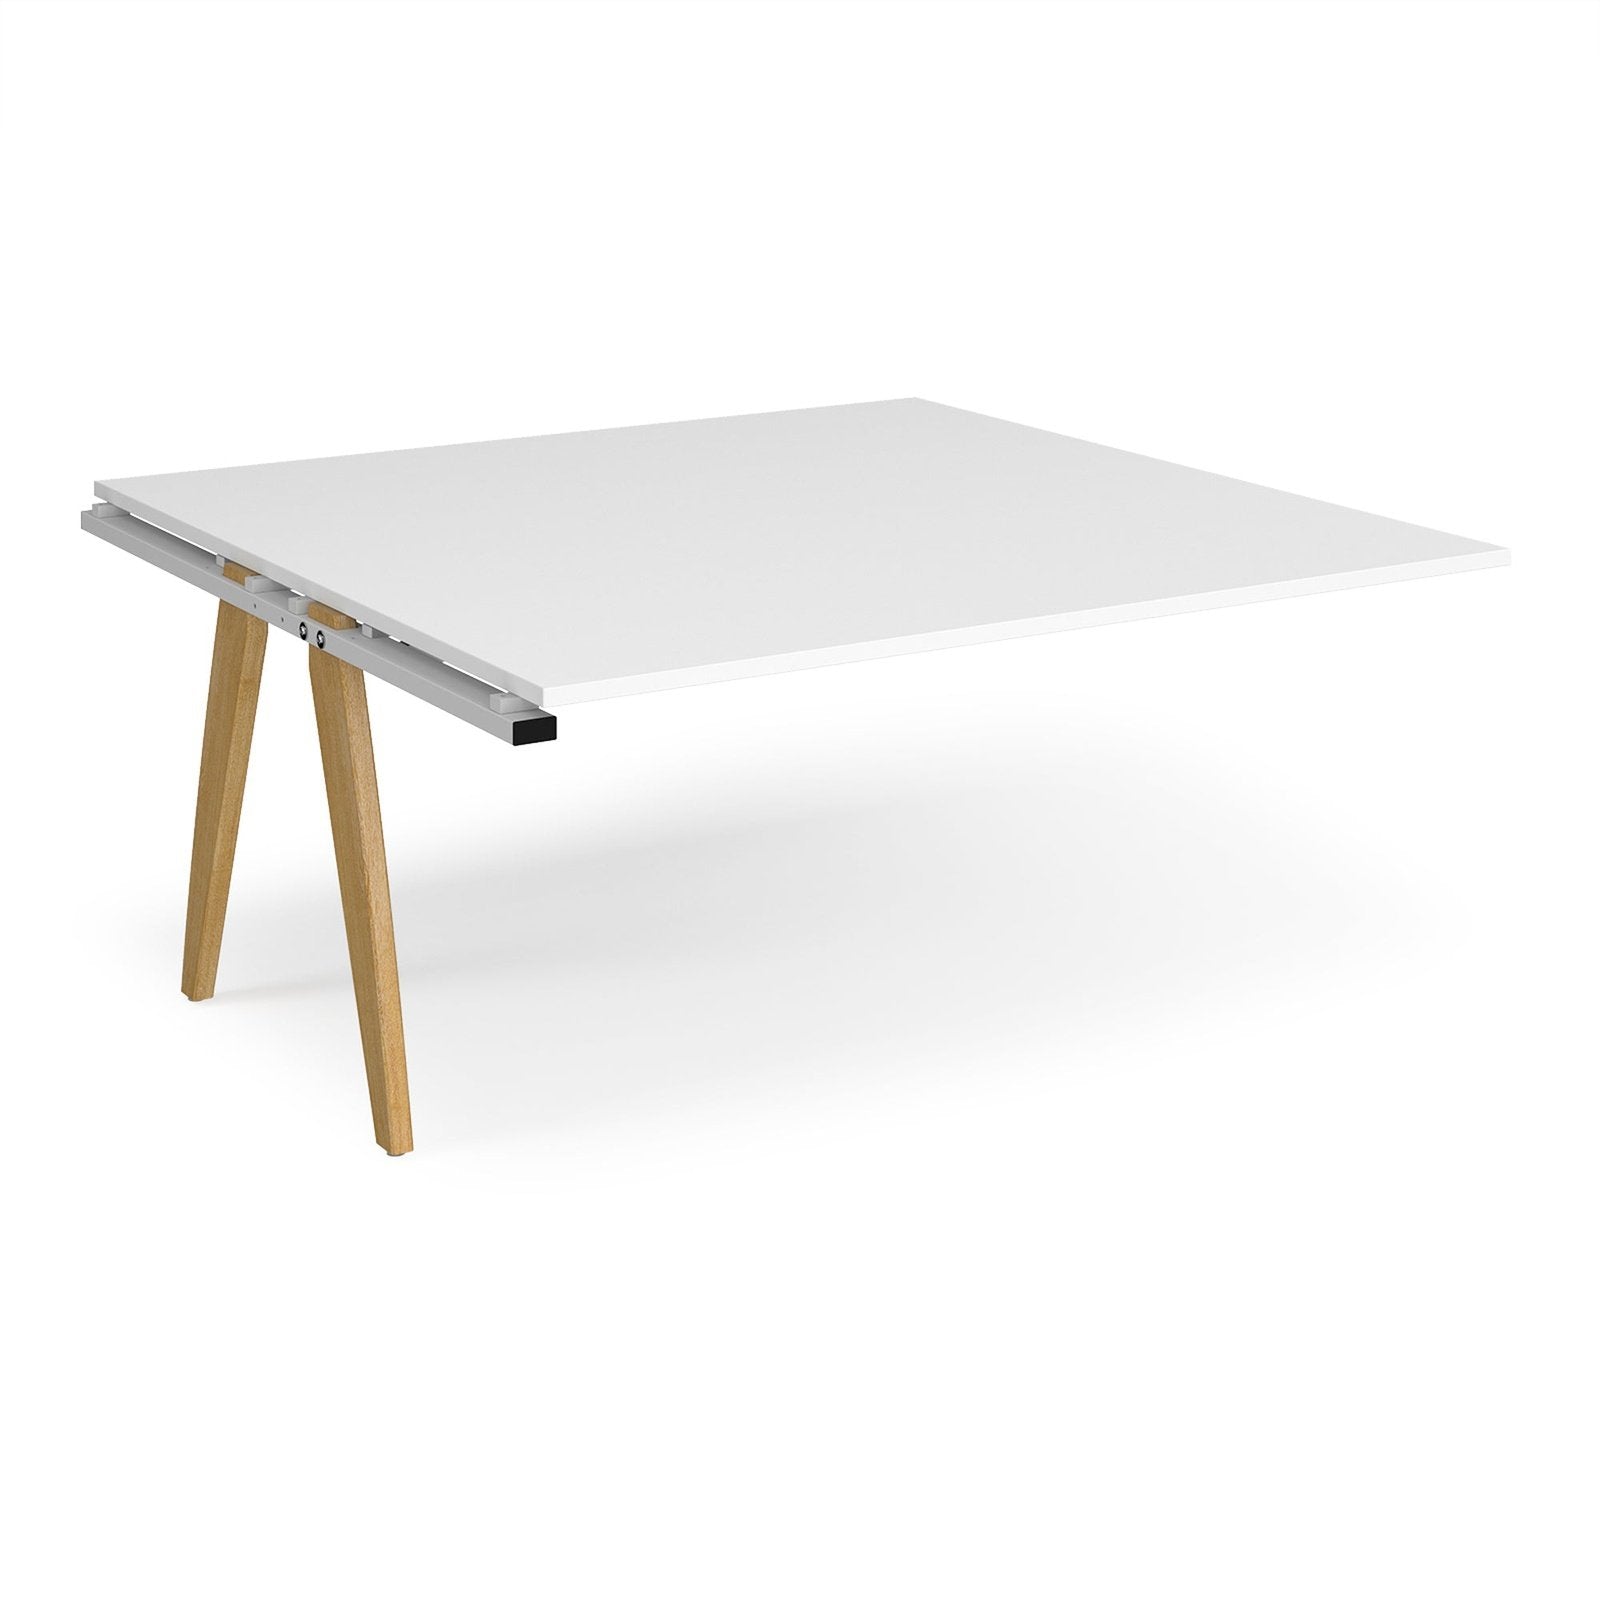 Fuze boardroom table add on unit x 1600mm - frame, white top - Office Products Online